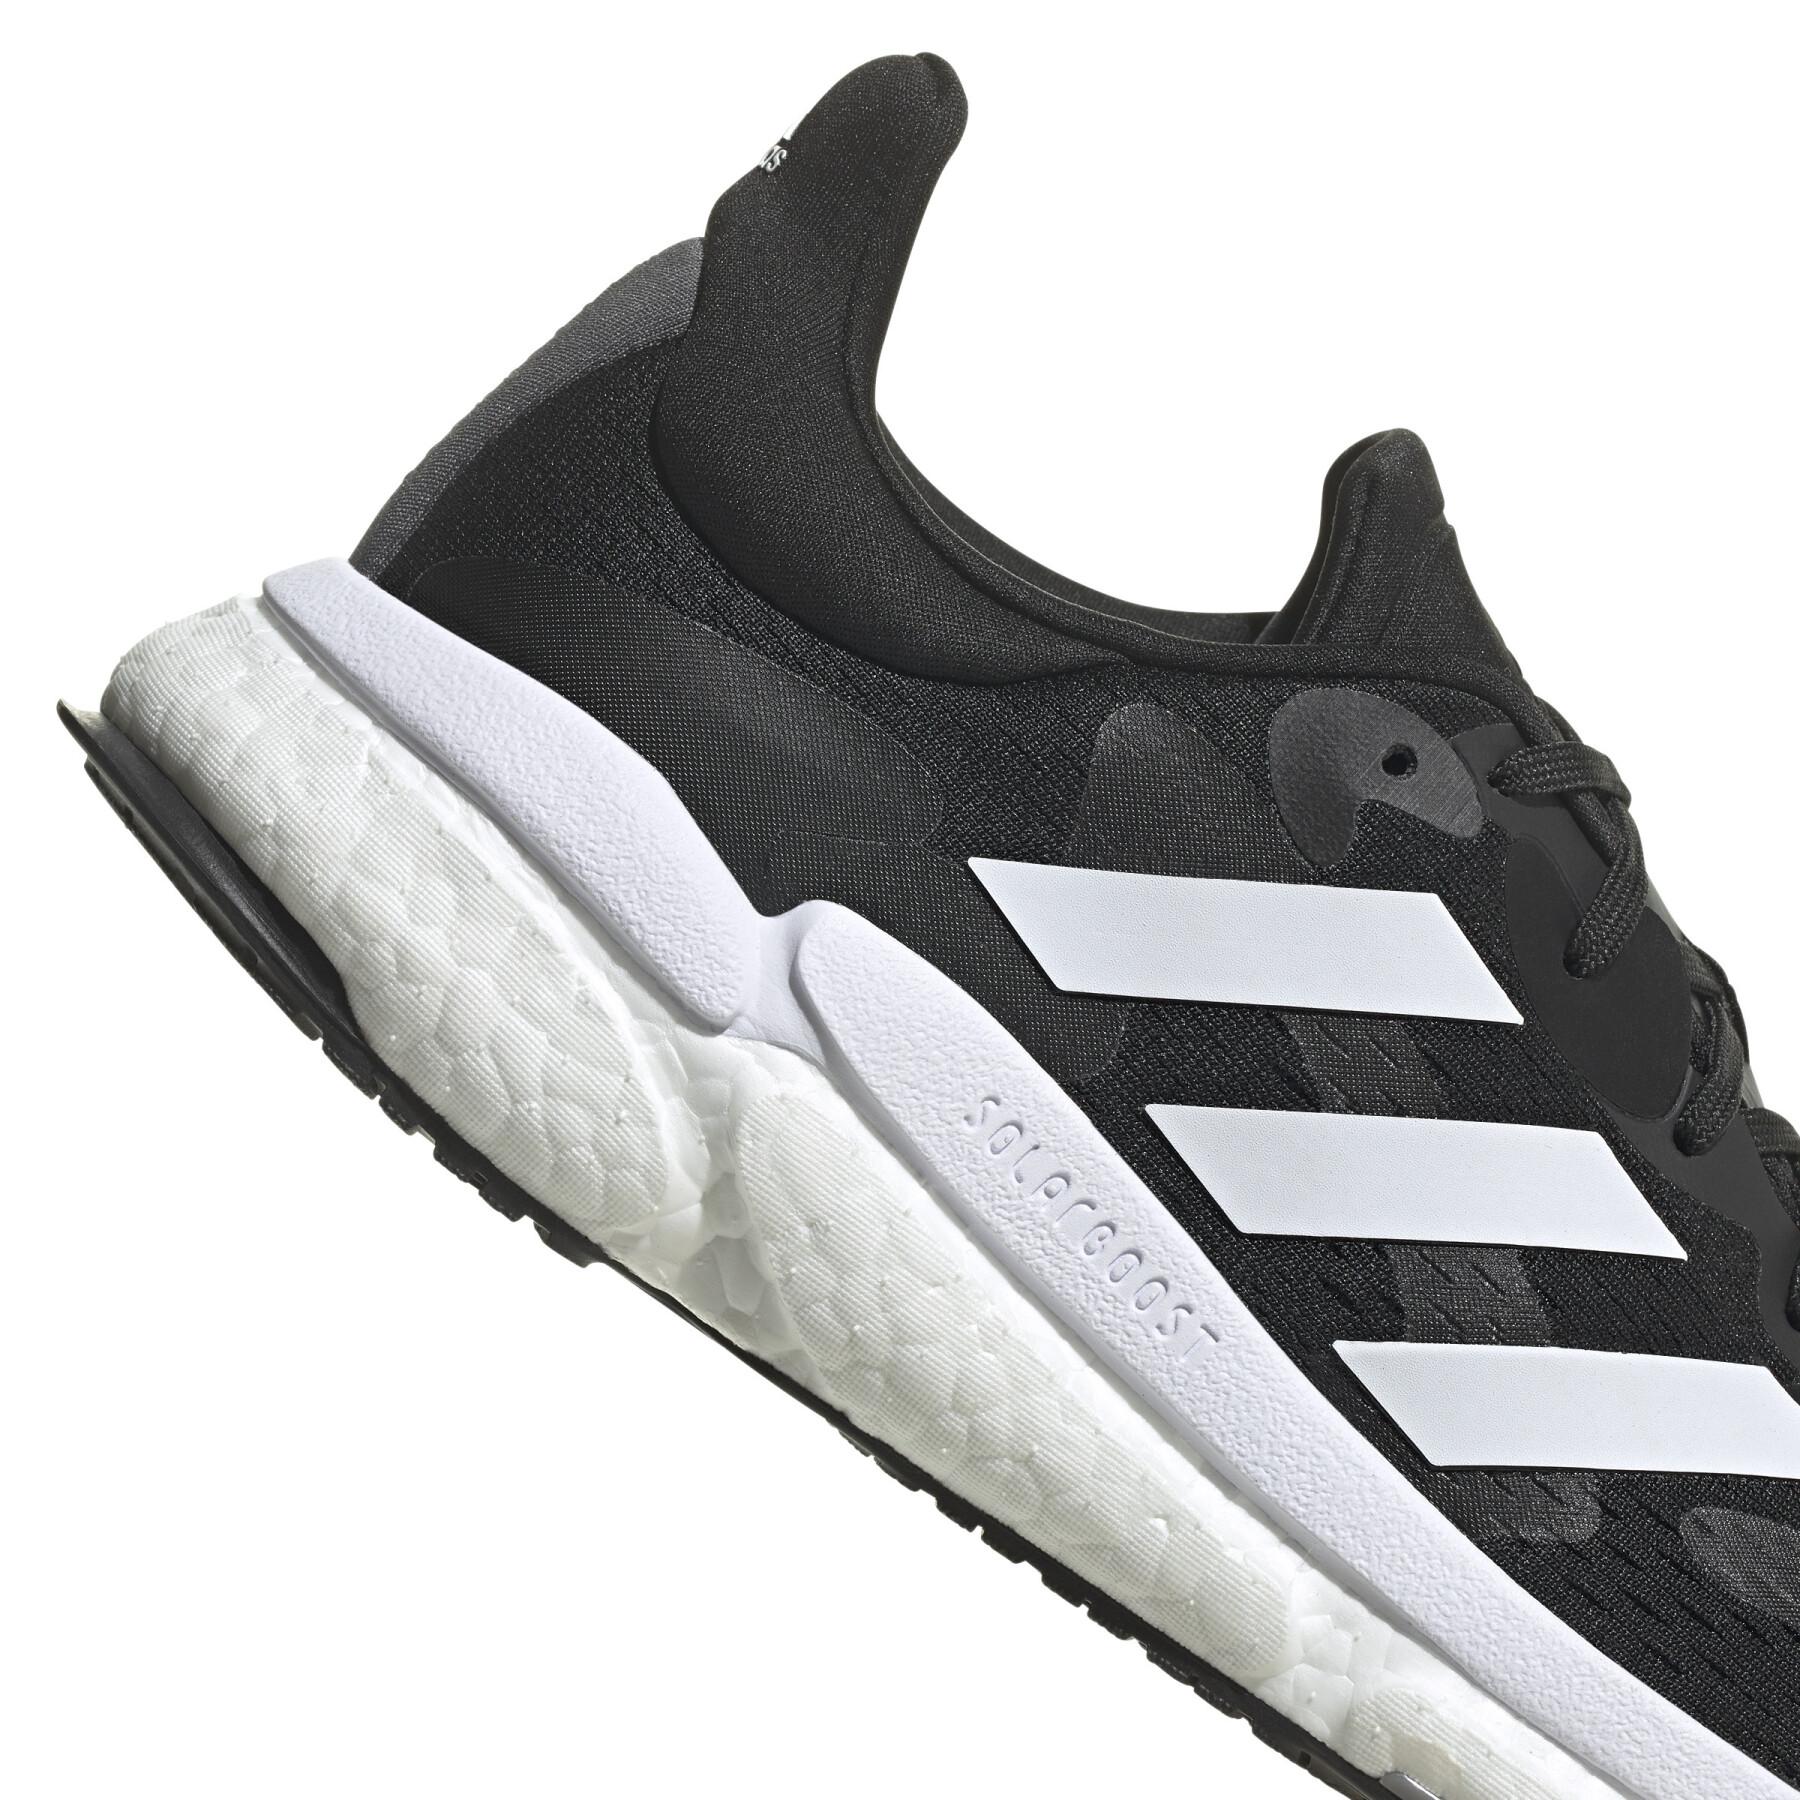 Shoes from running adidas Solarboost 4